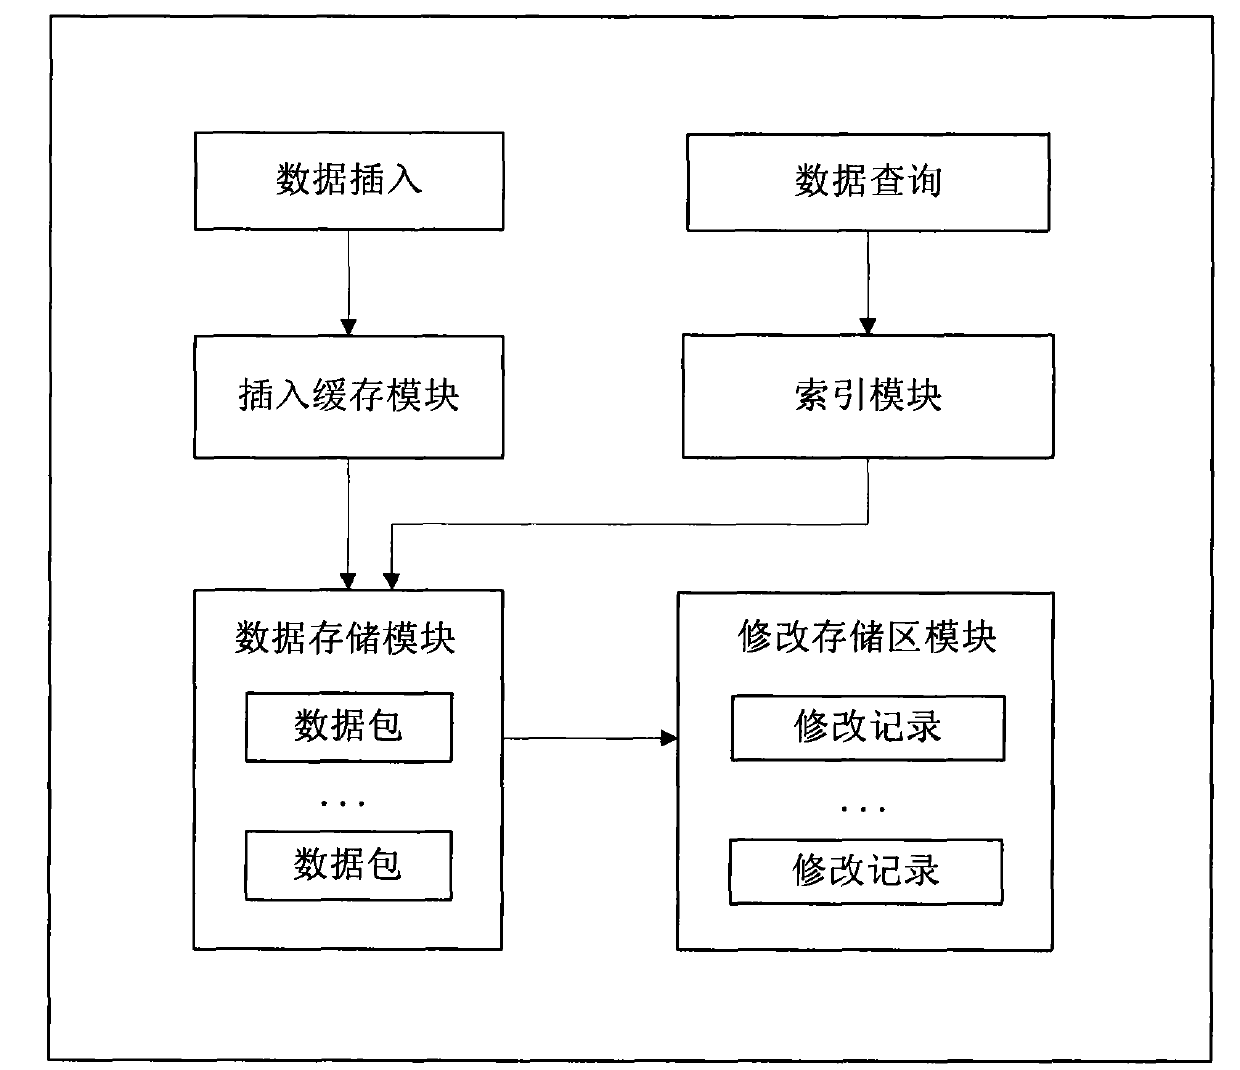 Multi-version database storage engine system and related processing implementation method thereof